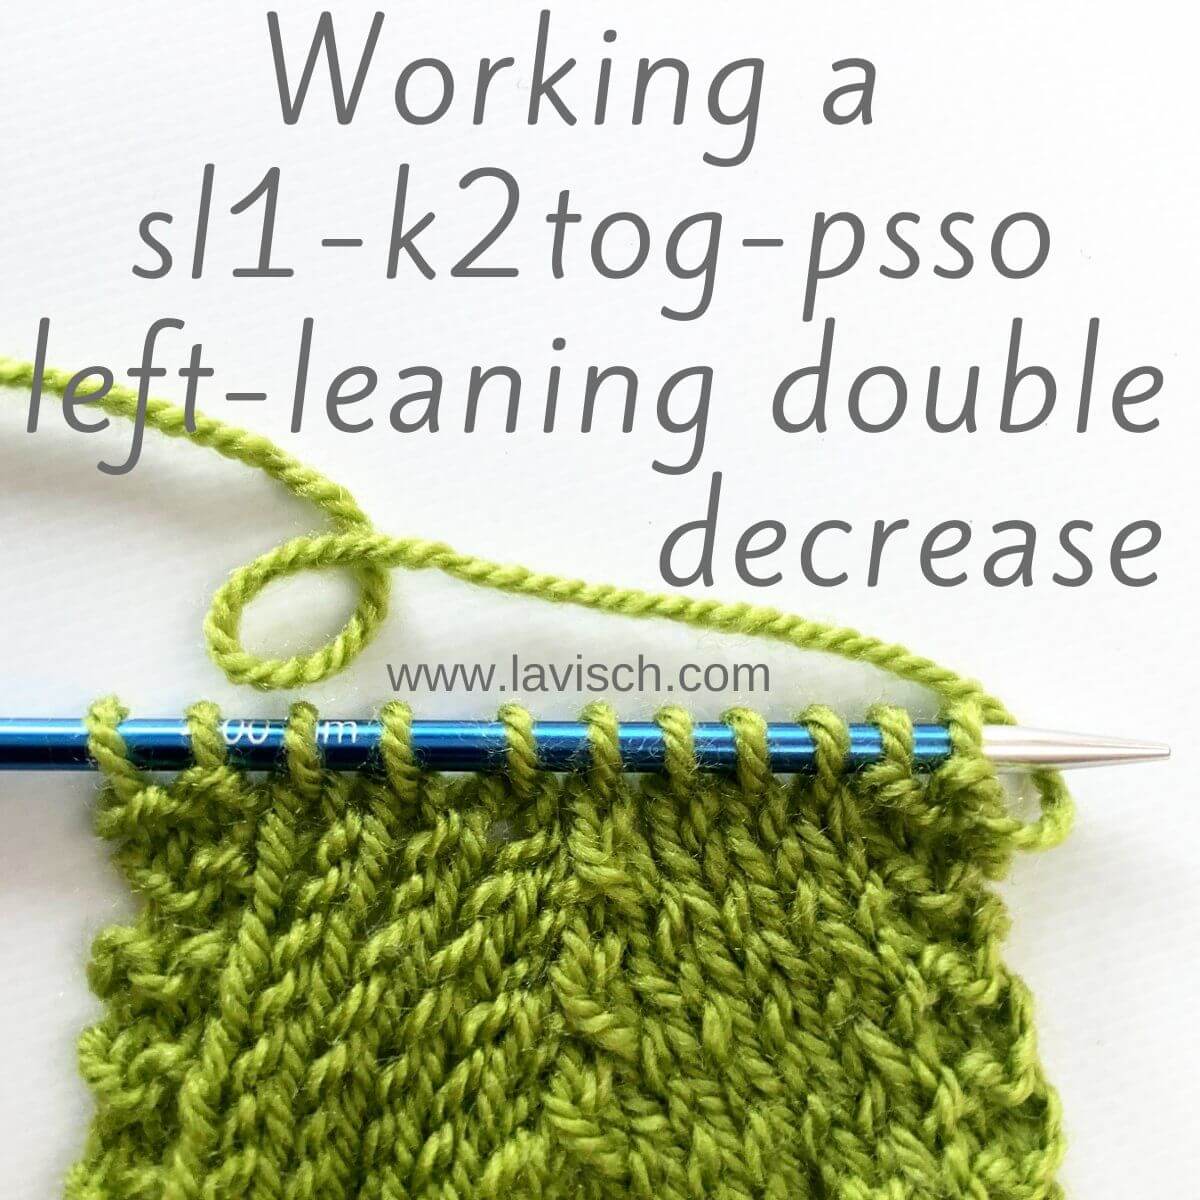 Learn to Knit: K2tog, knit two sts together